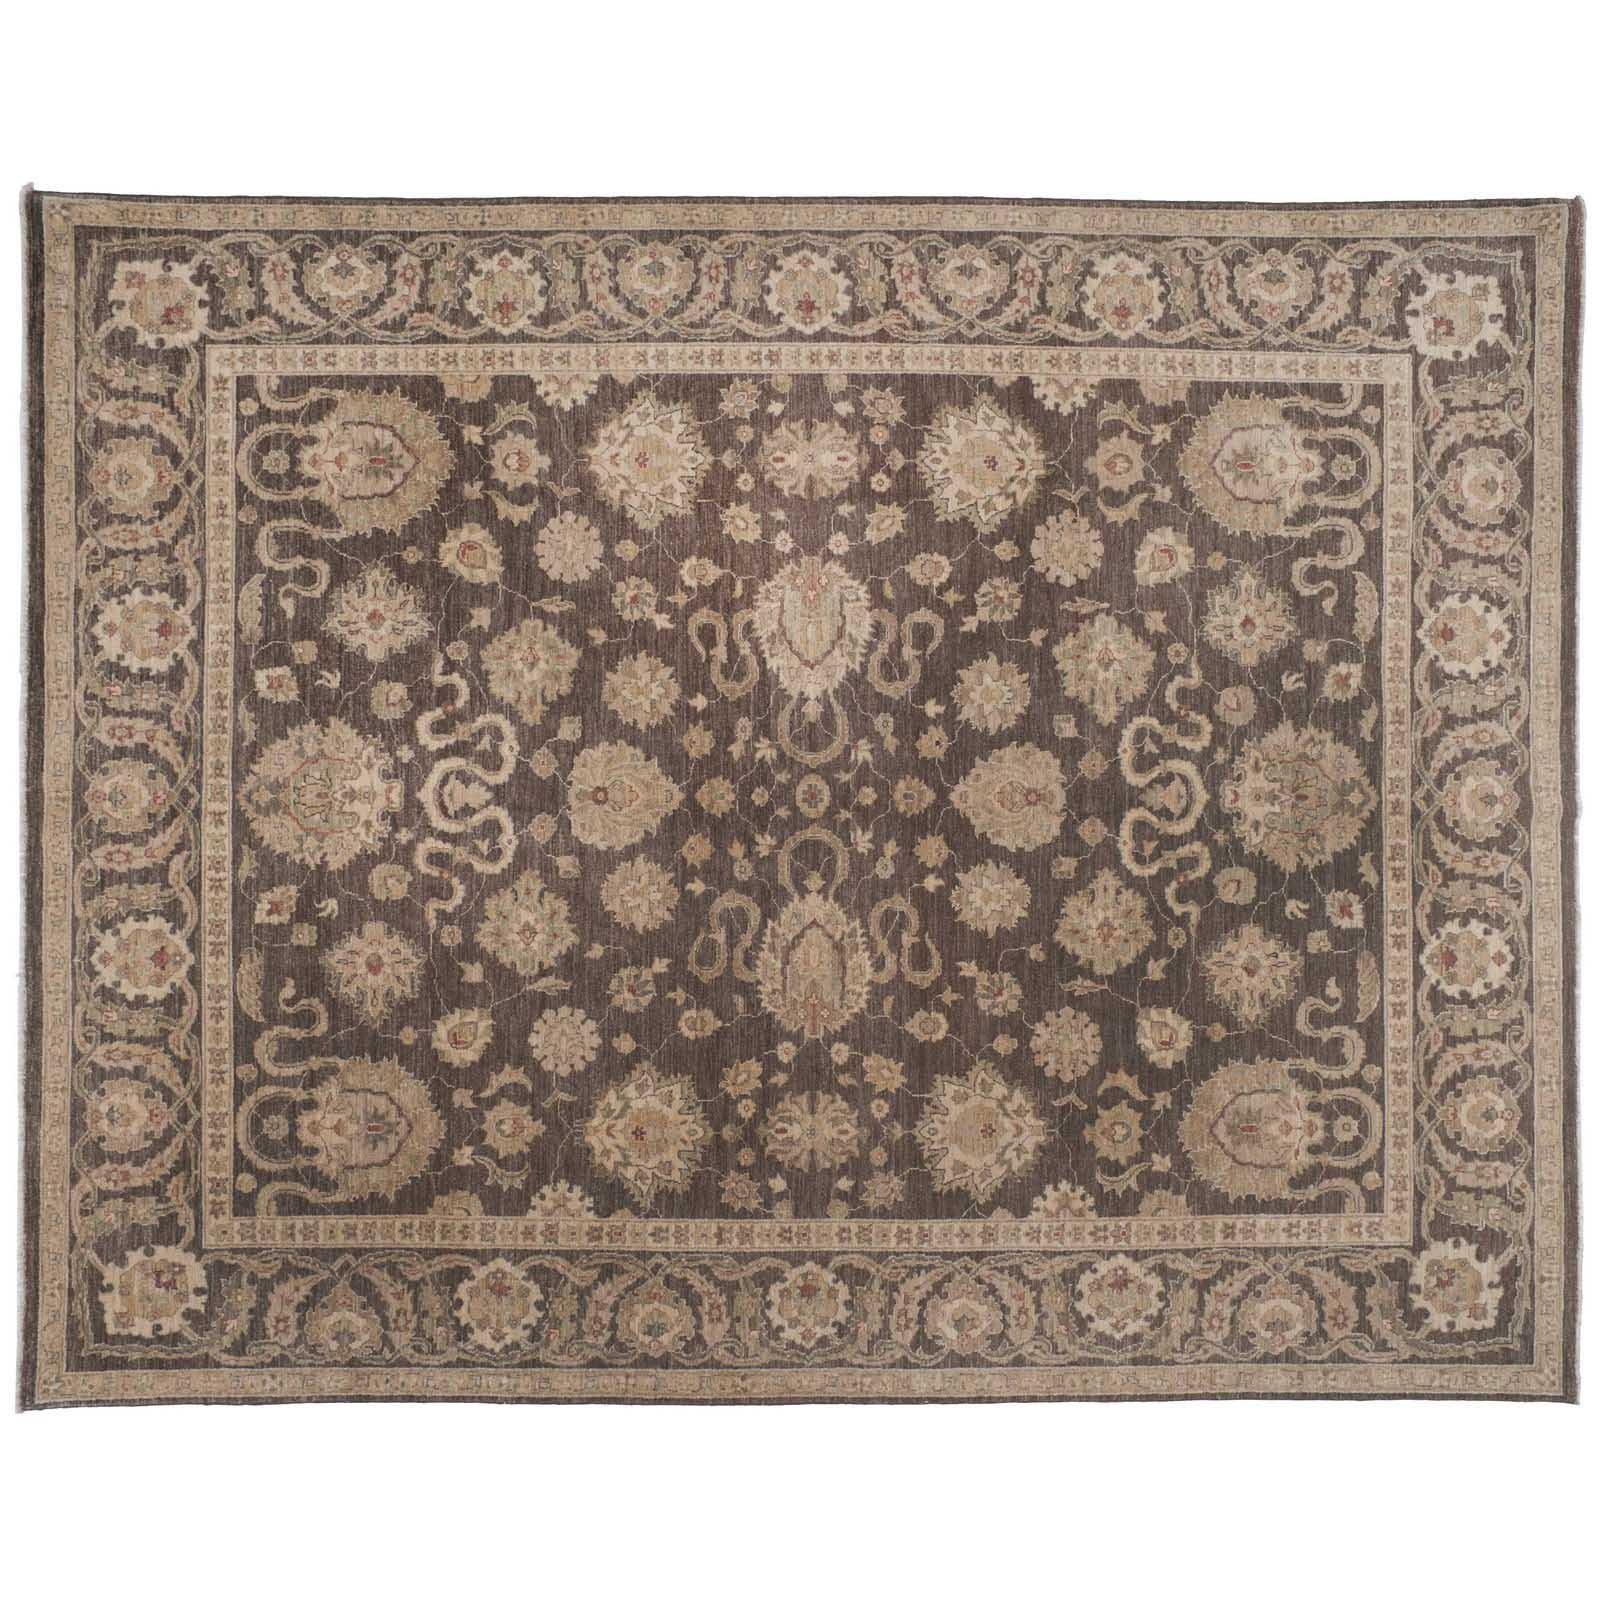 Brown Traditional Pakistani Floral Area Rug